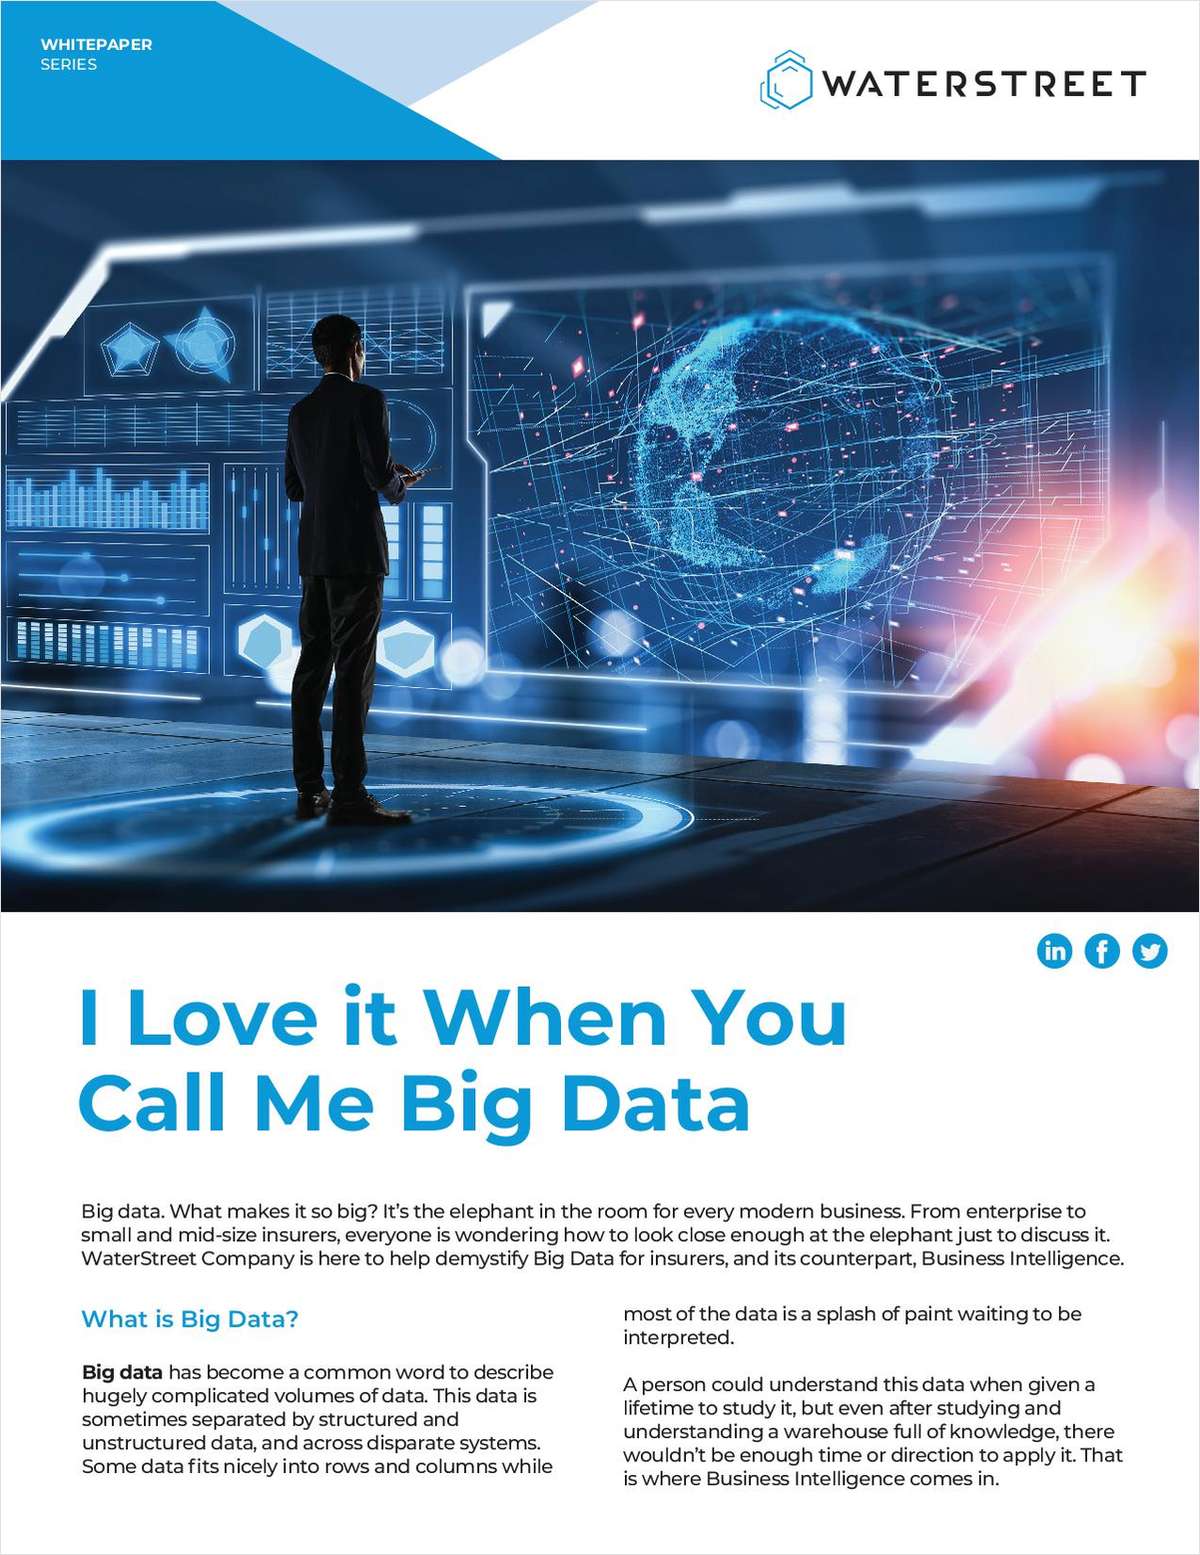 I Love It When You Call Me Big Data: Demystifying Business Intelligence